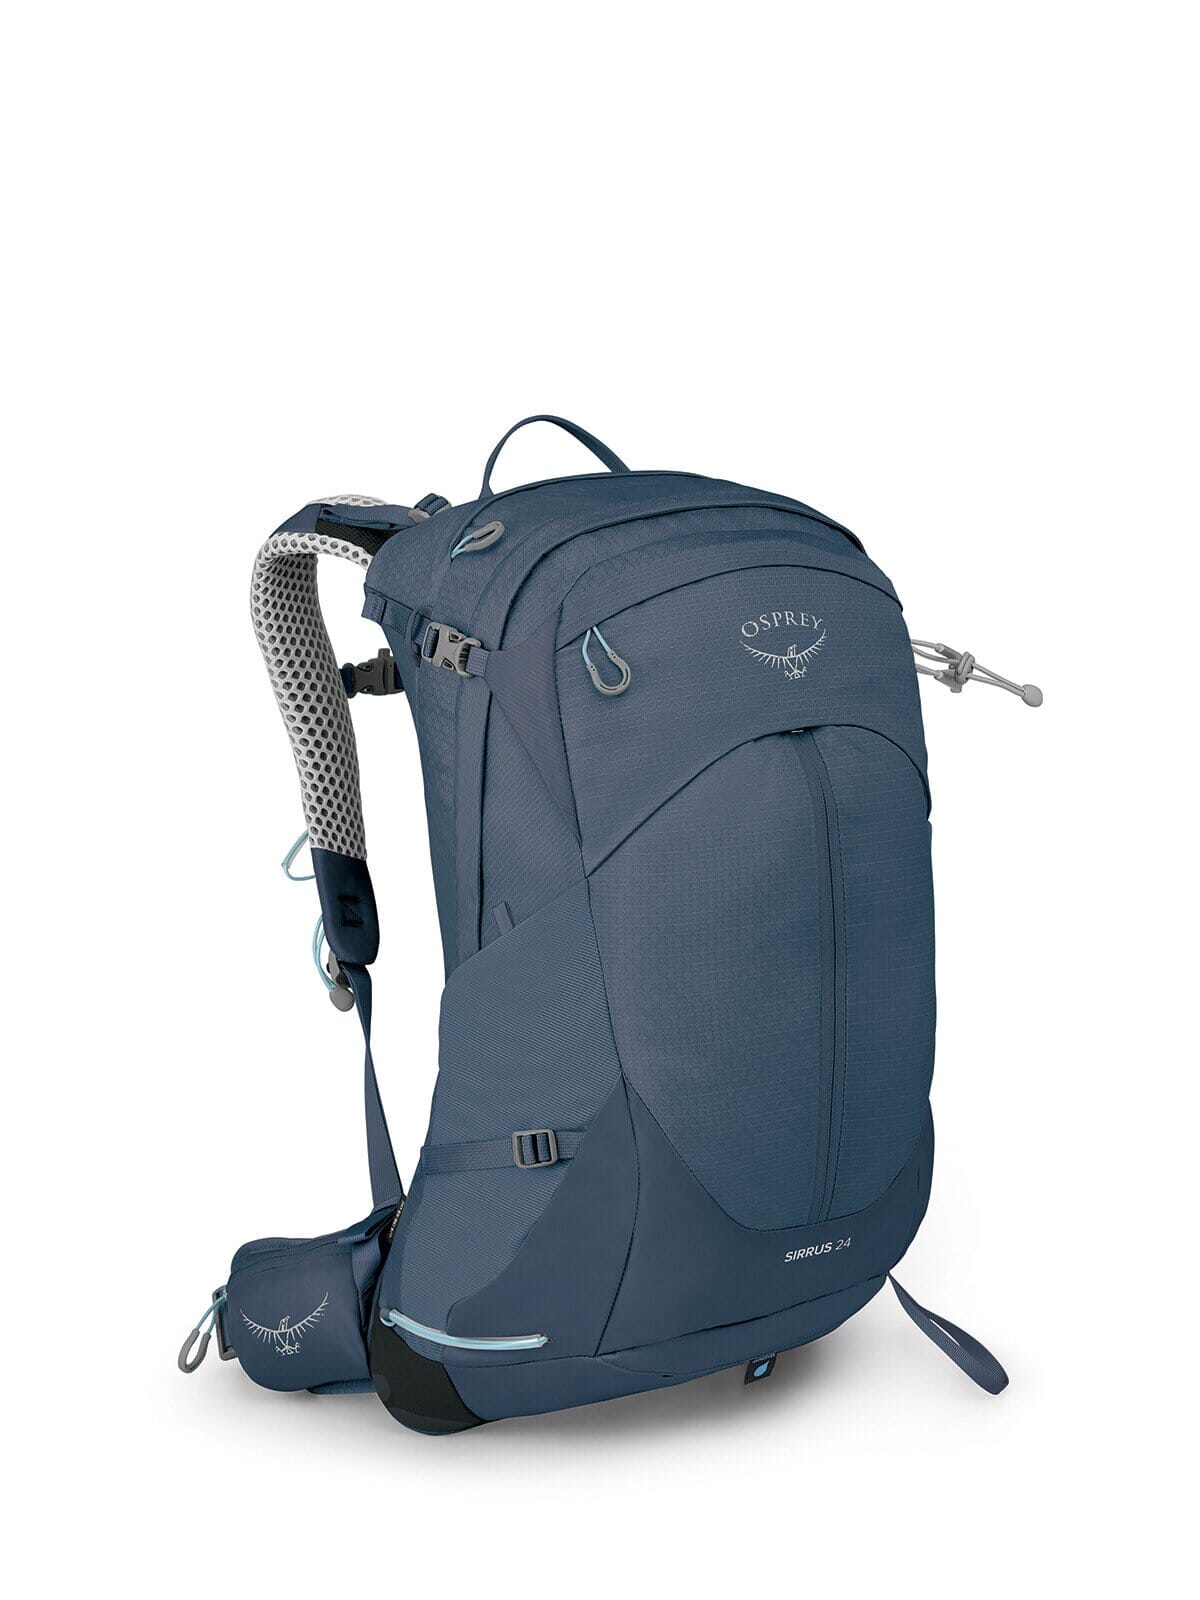 Osprey Sirrus 24 Litre Women's Ventilated Daypack Muted Space Blue One Size 